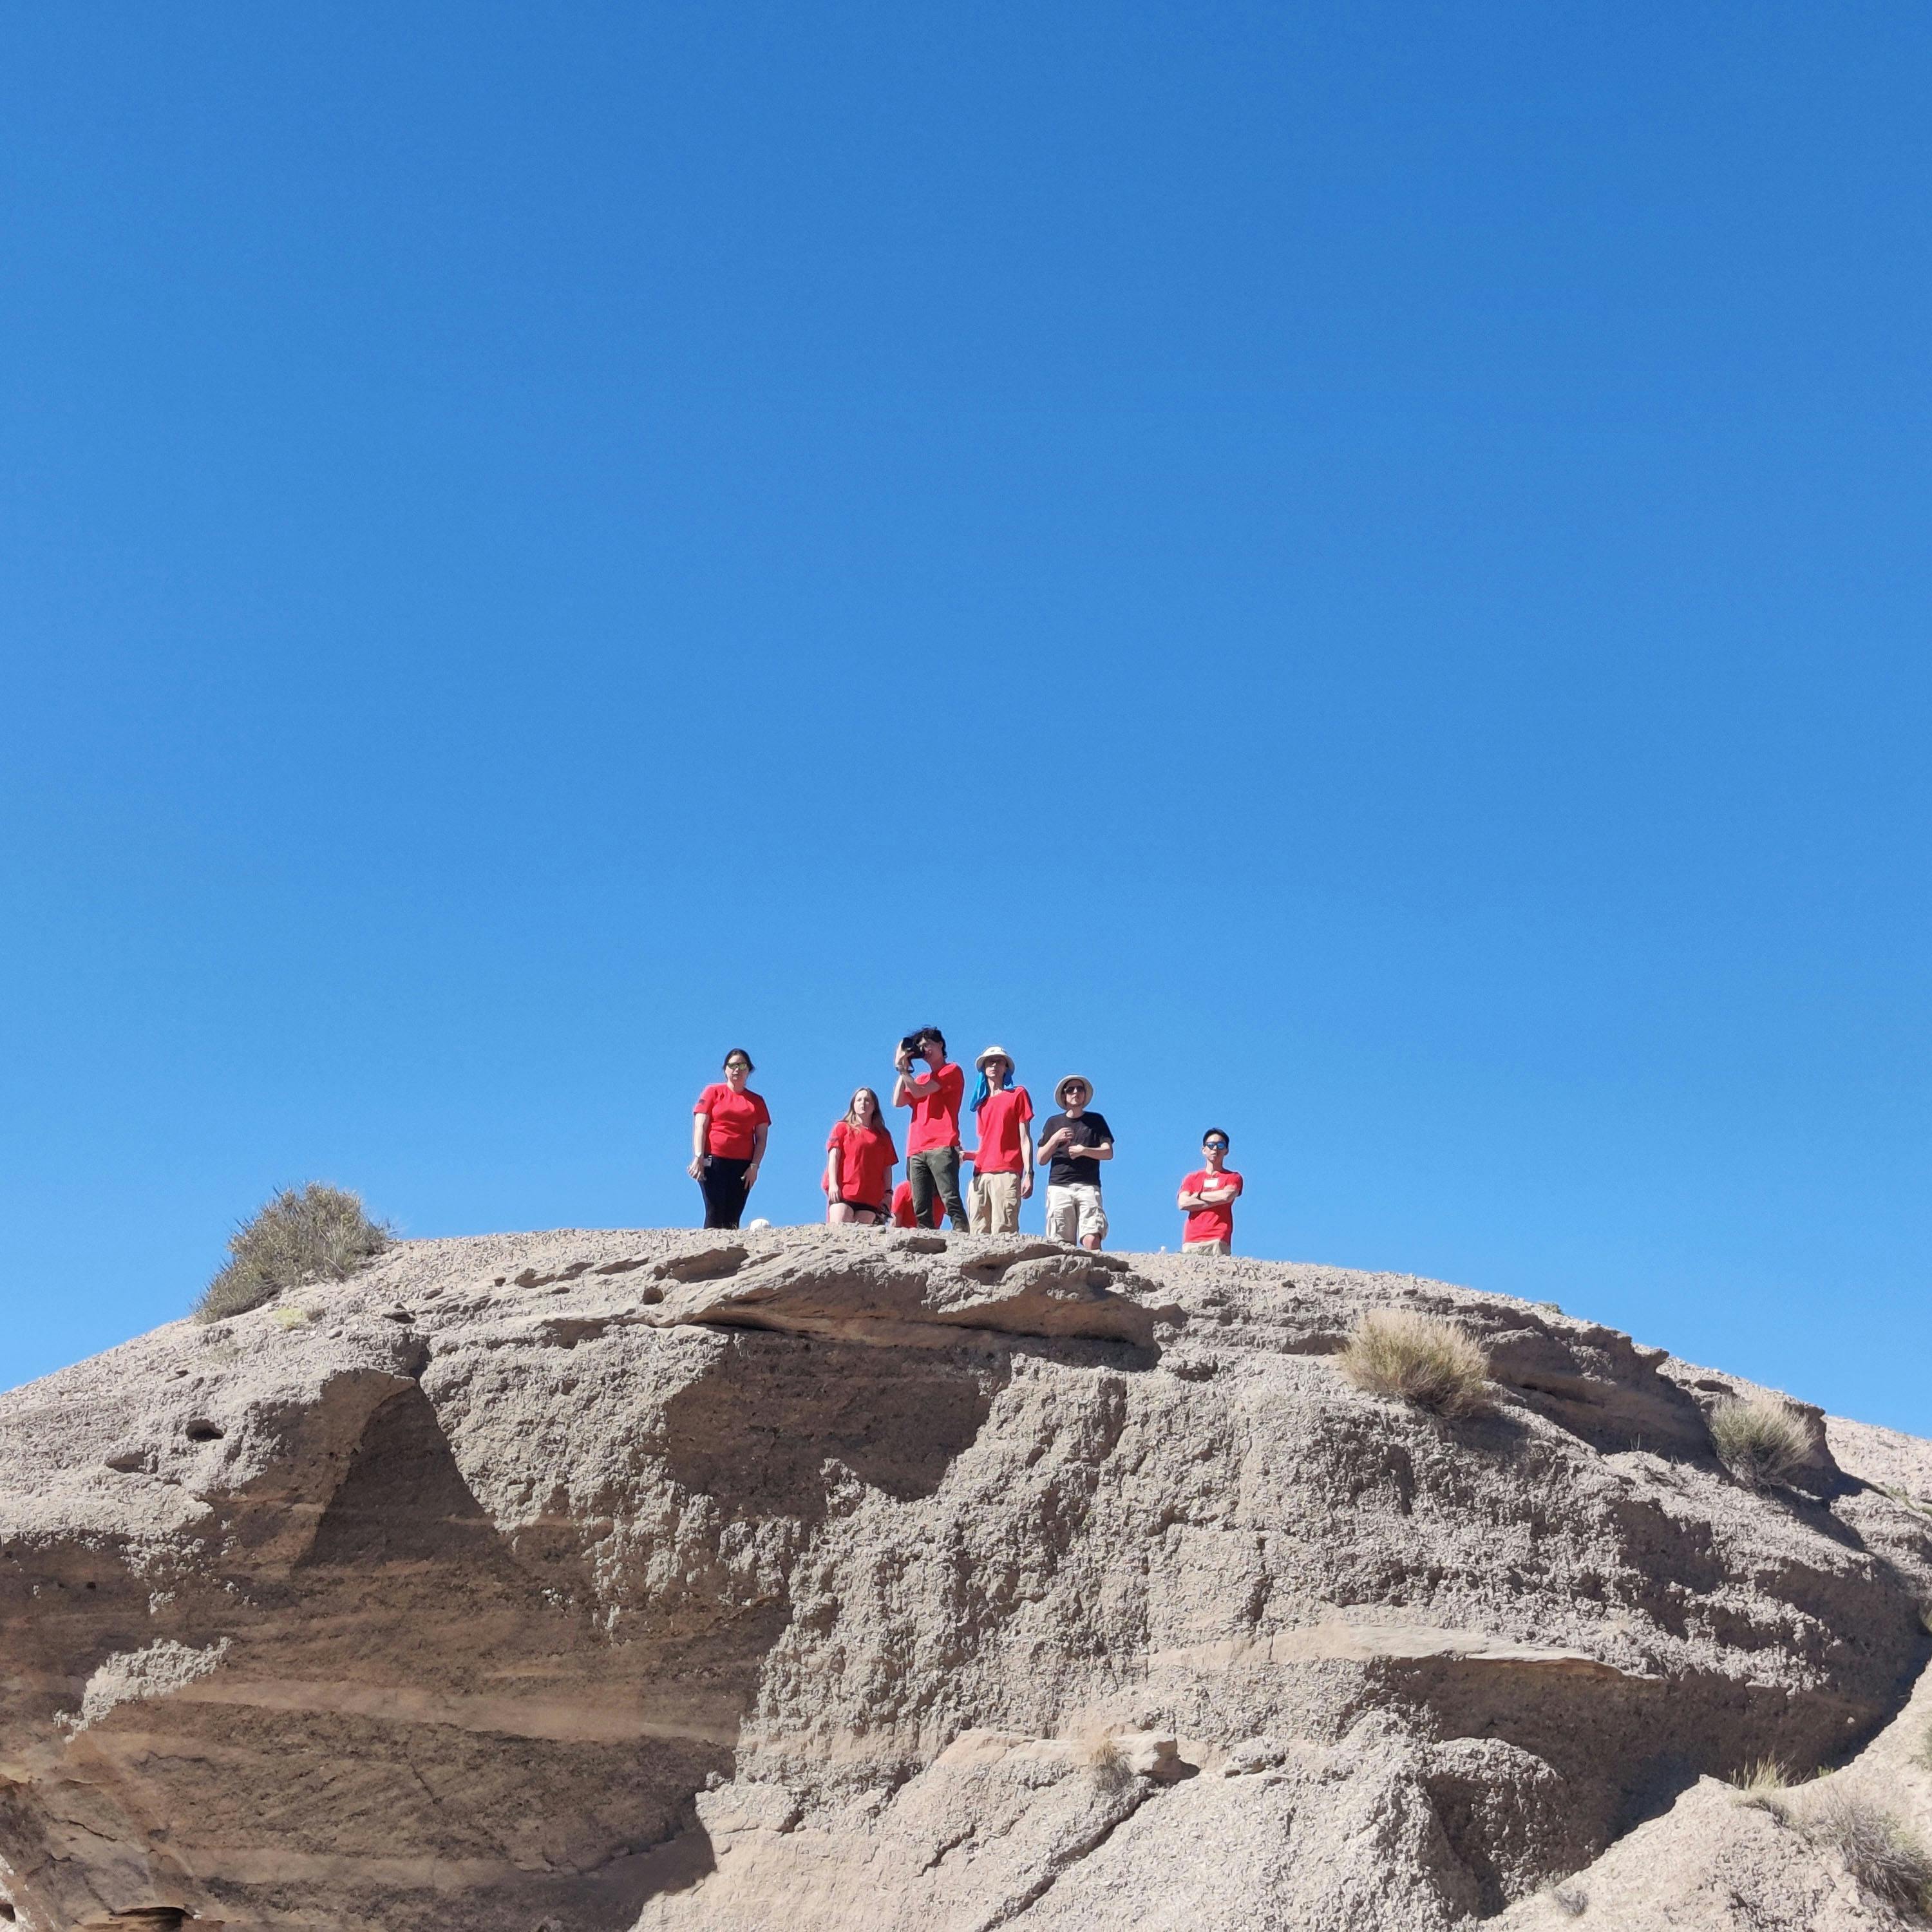 (most of) our team, standing on a rock